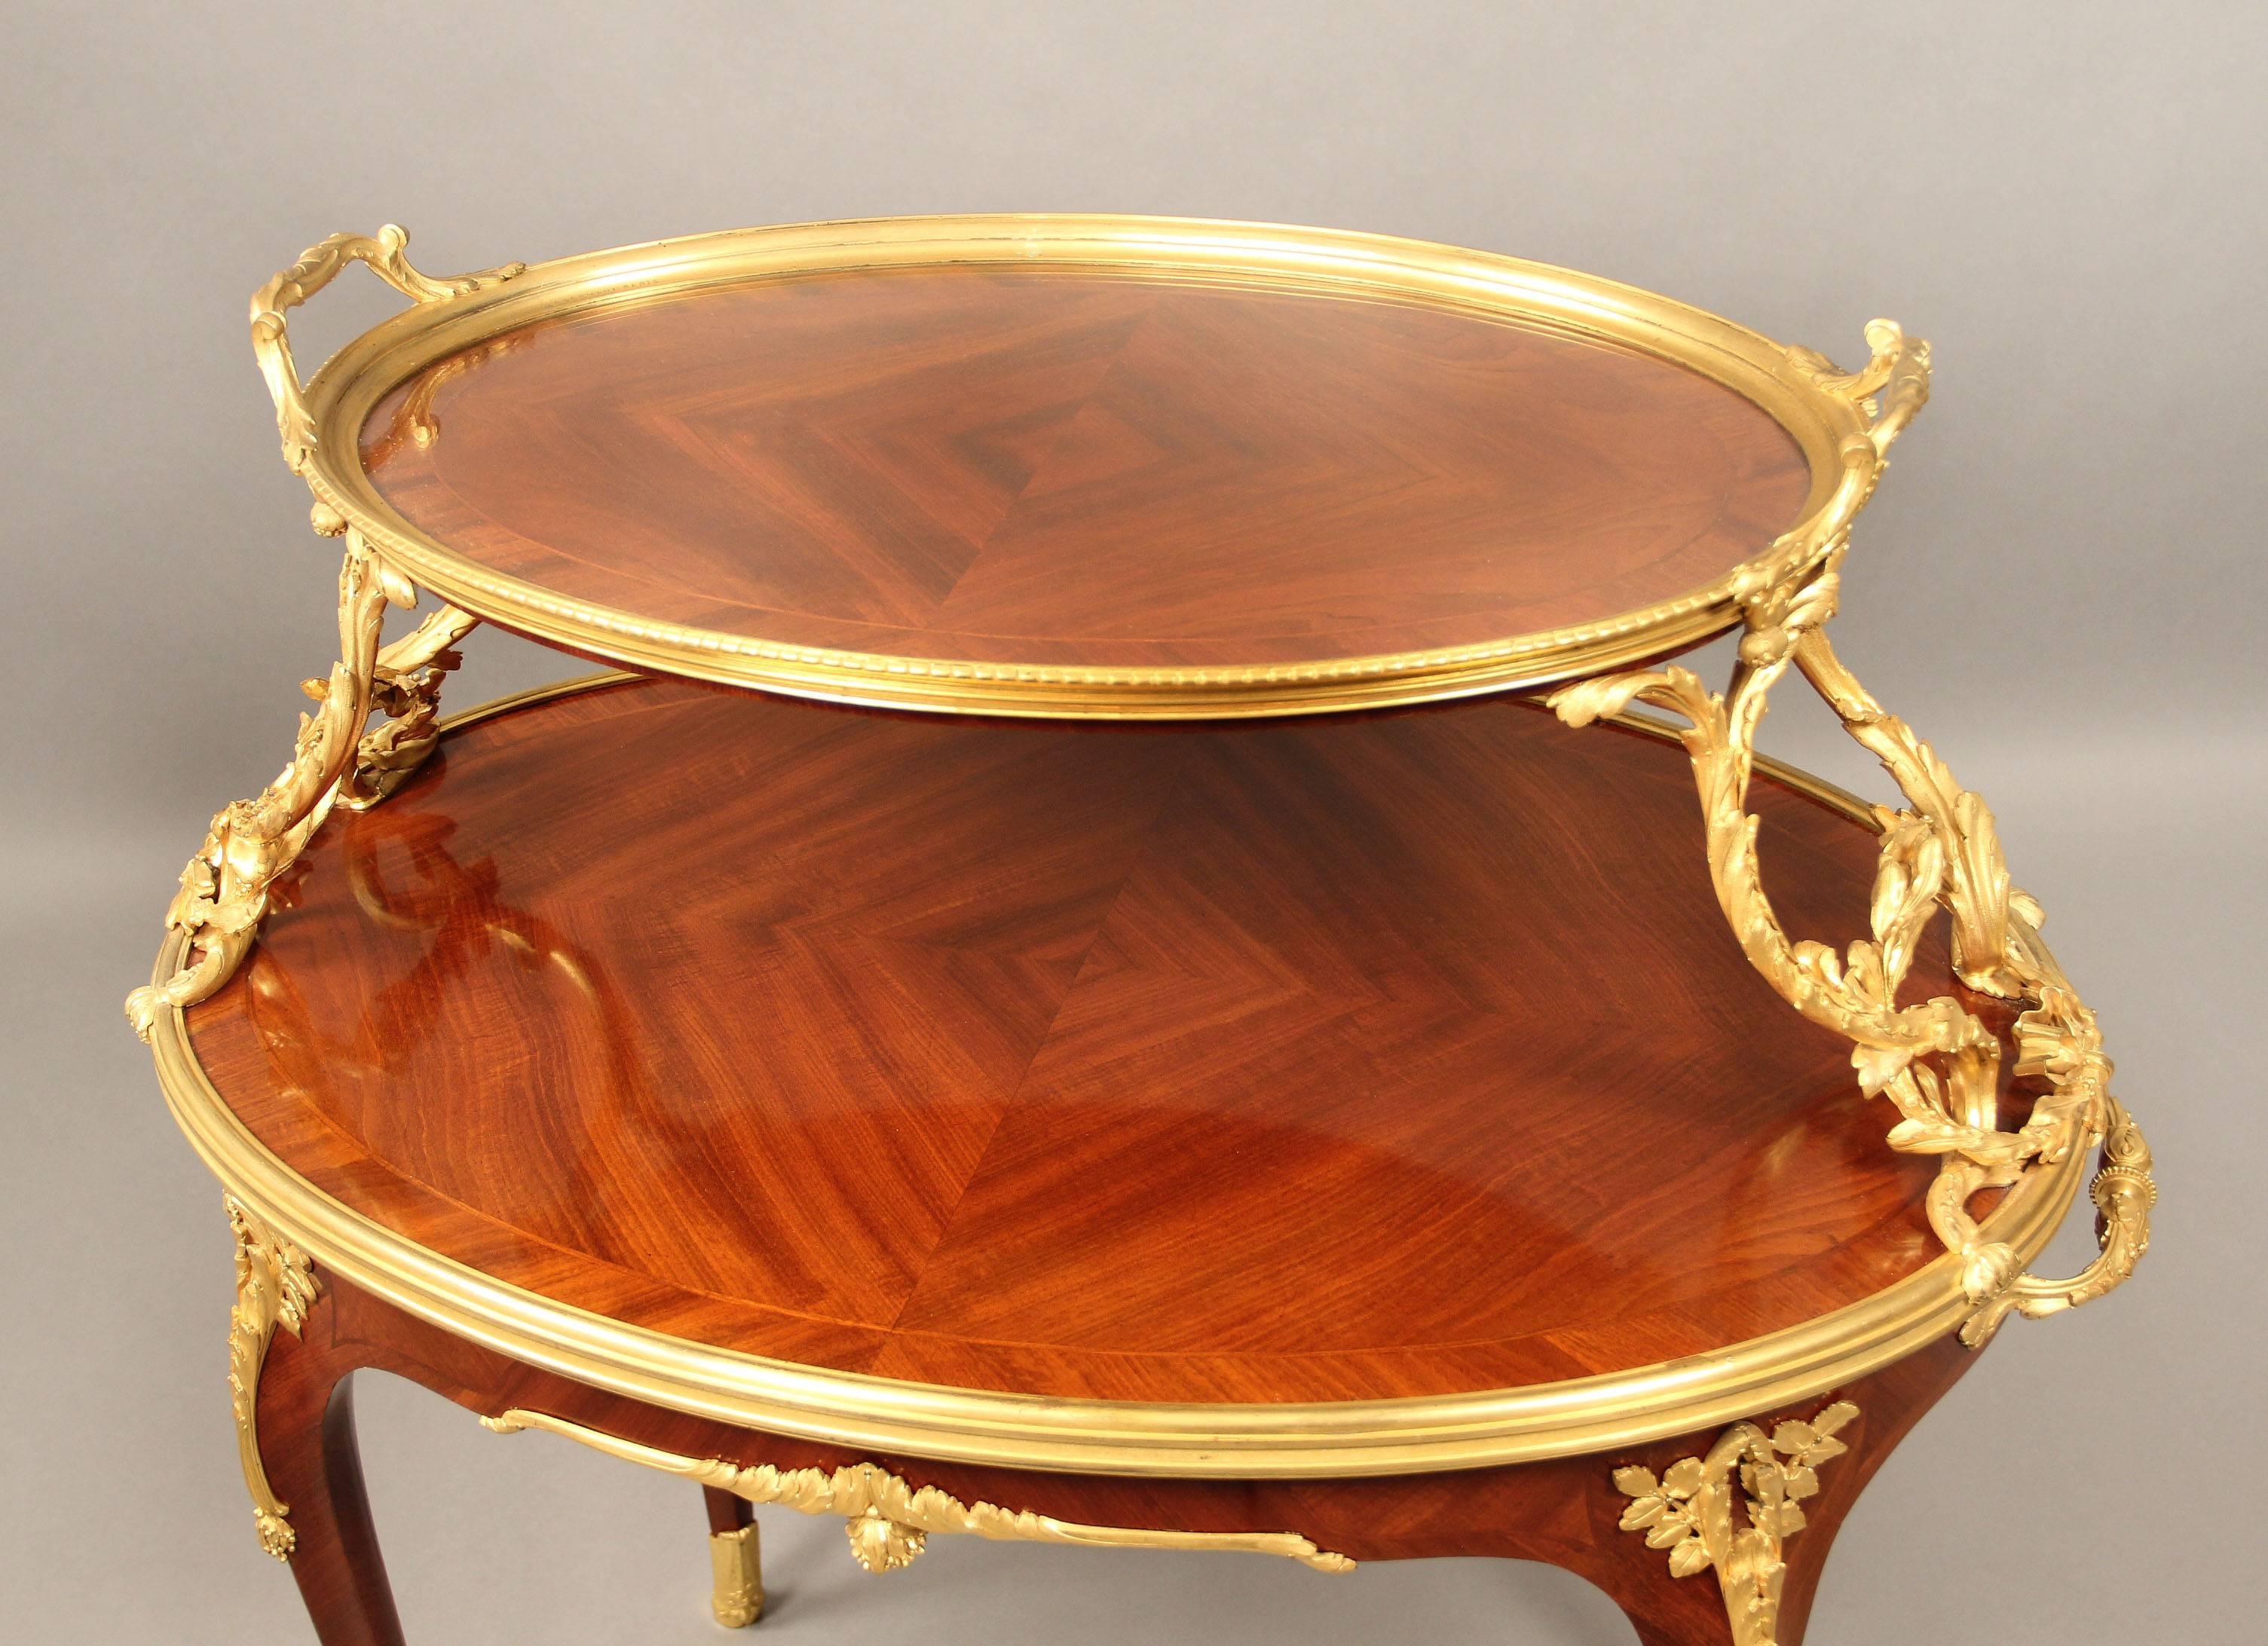 A fine late 19th century gilt bronze-mounted Louis XV style two-tier tea table.

By Paul Sormani.

The oval upper tier surmounted by an bronze framed removable glass tray held to each side by a scrolled berry hung vine and laurel garland